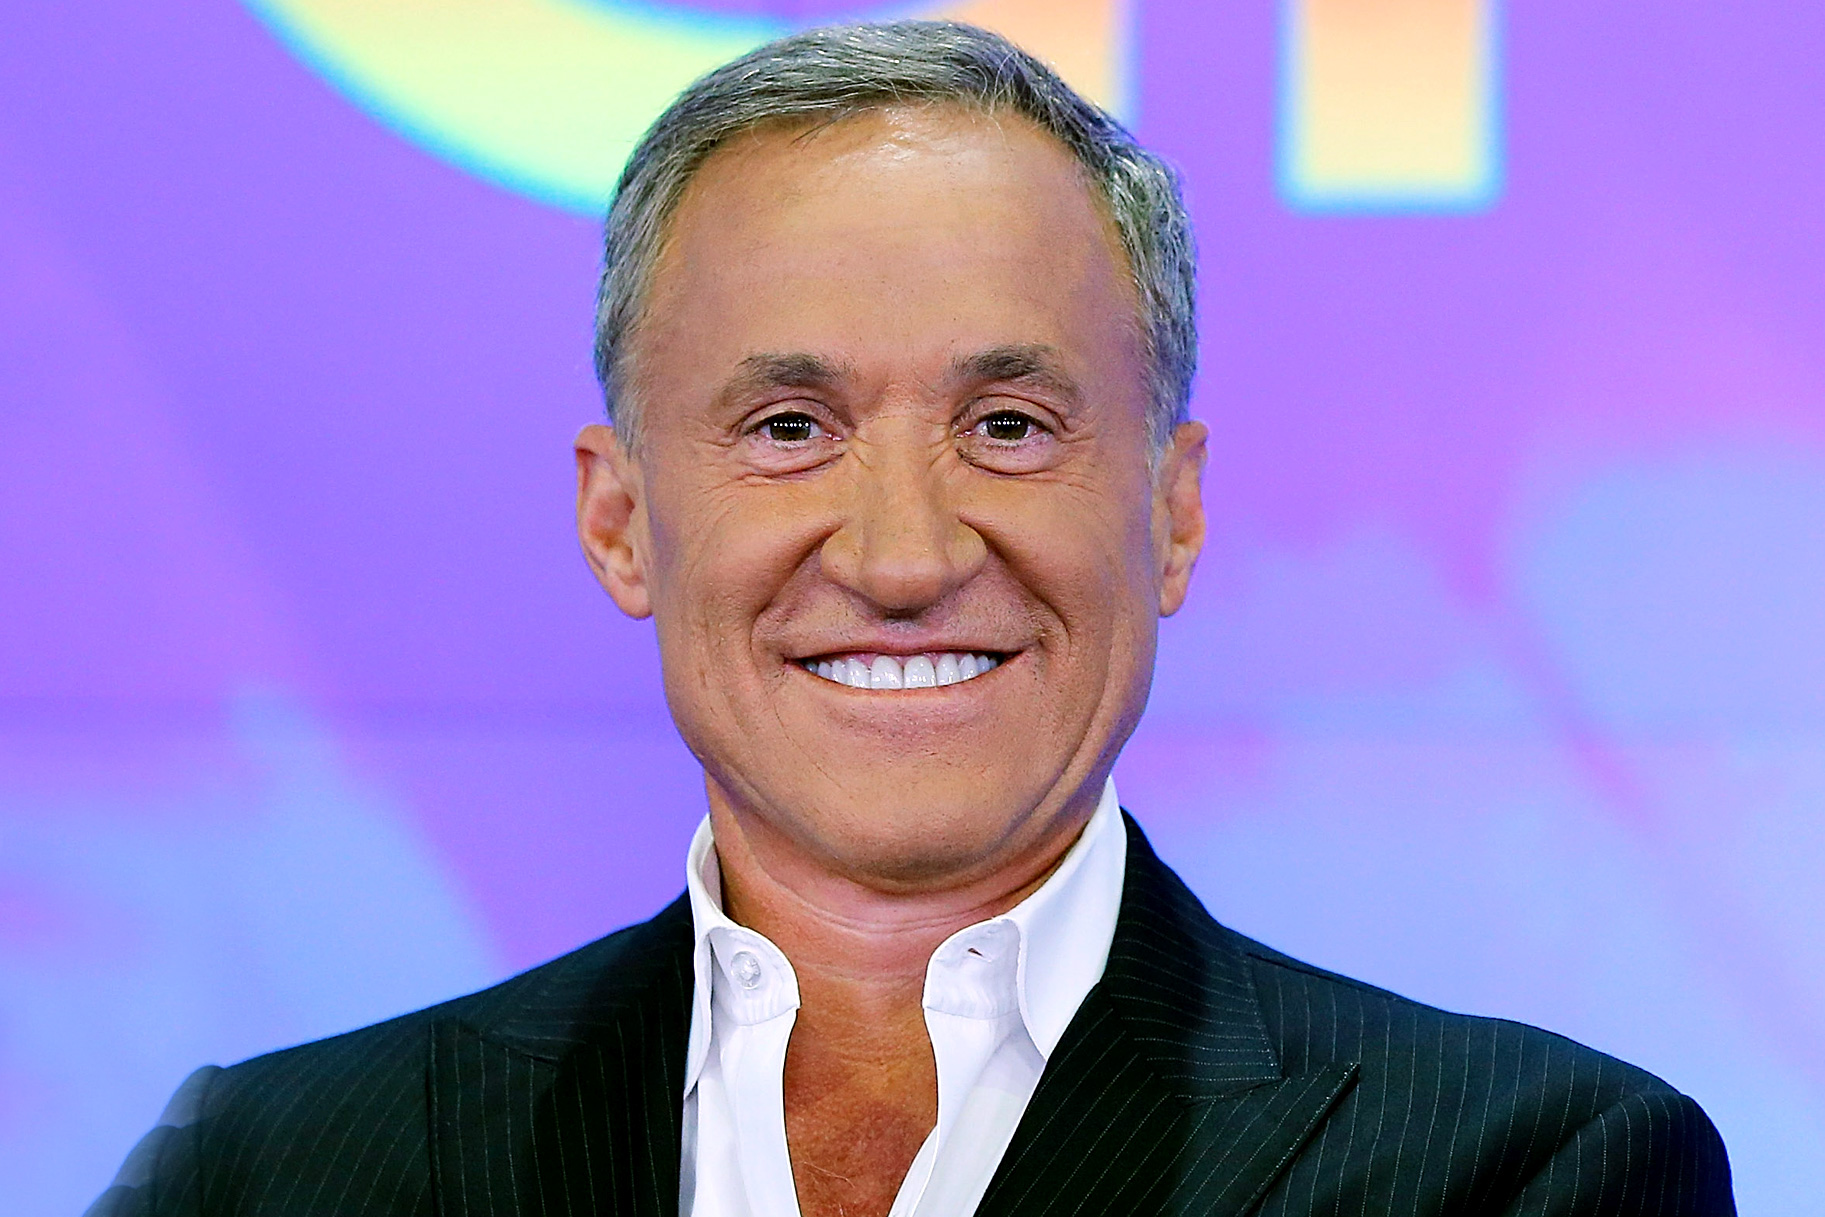 Terry J. Dubrow has an estimated net worth of around $30 million